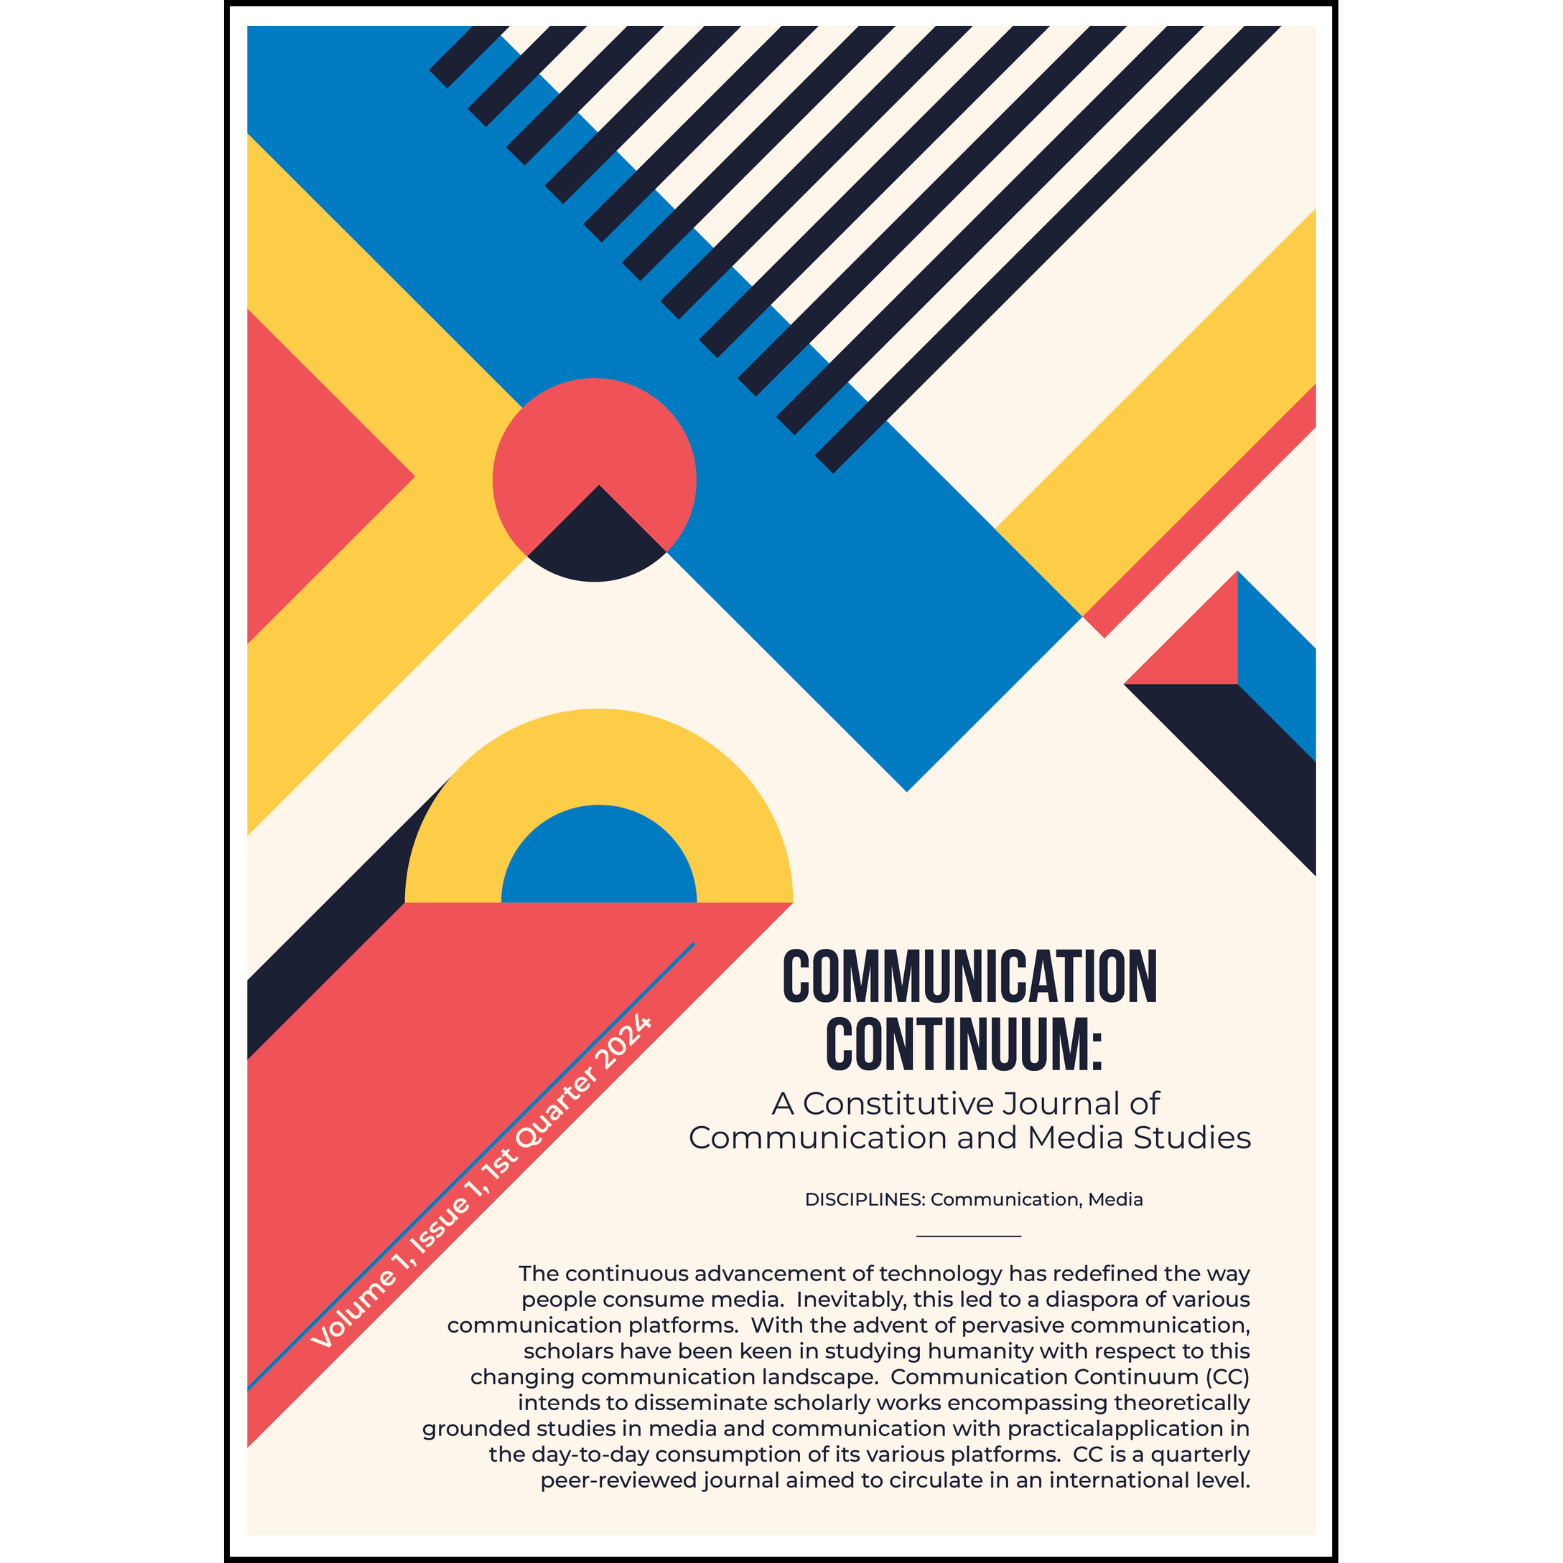 Communication Continuum: A Constitutive Journal of Communication and Media Studies